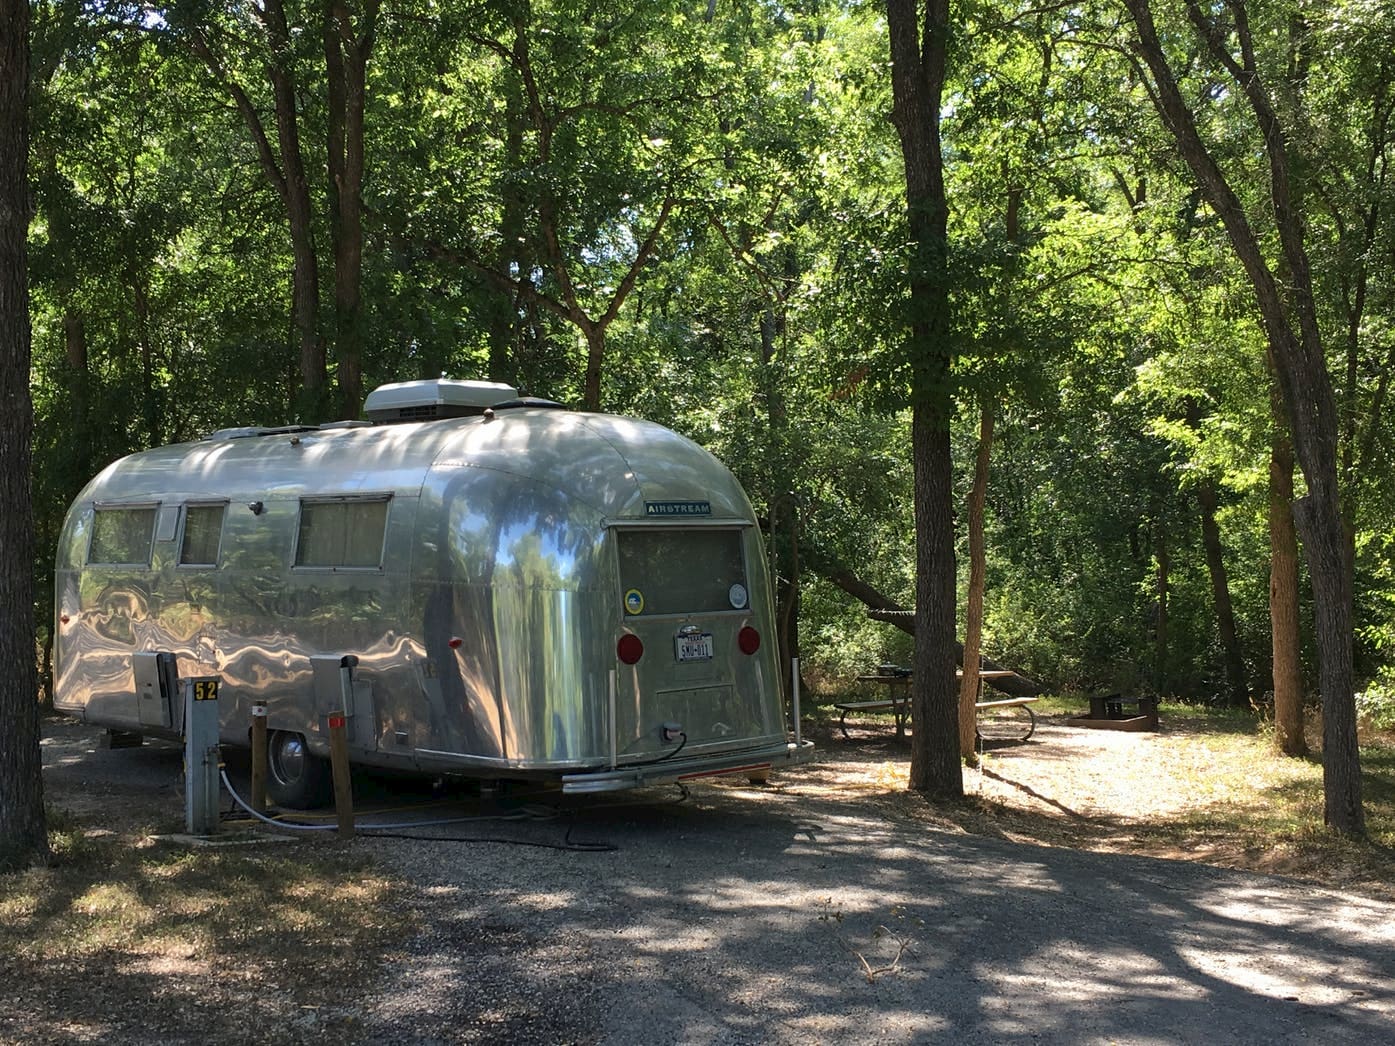 Silver airstream camper parked in wooded campsite.